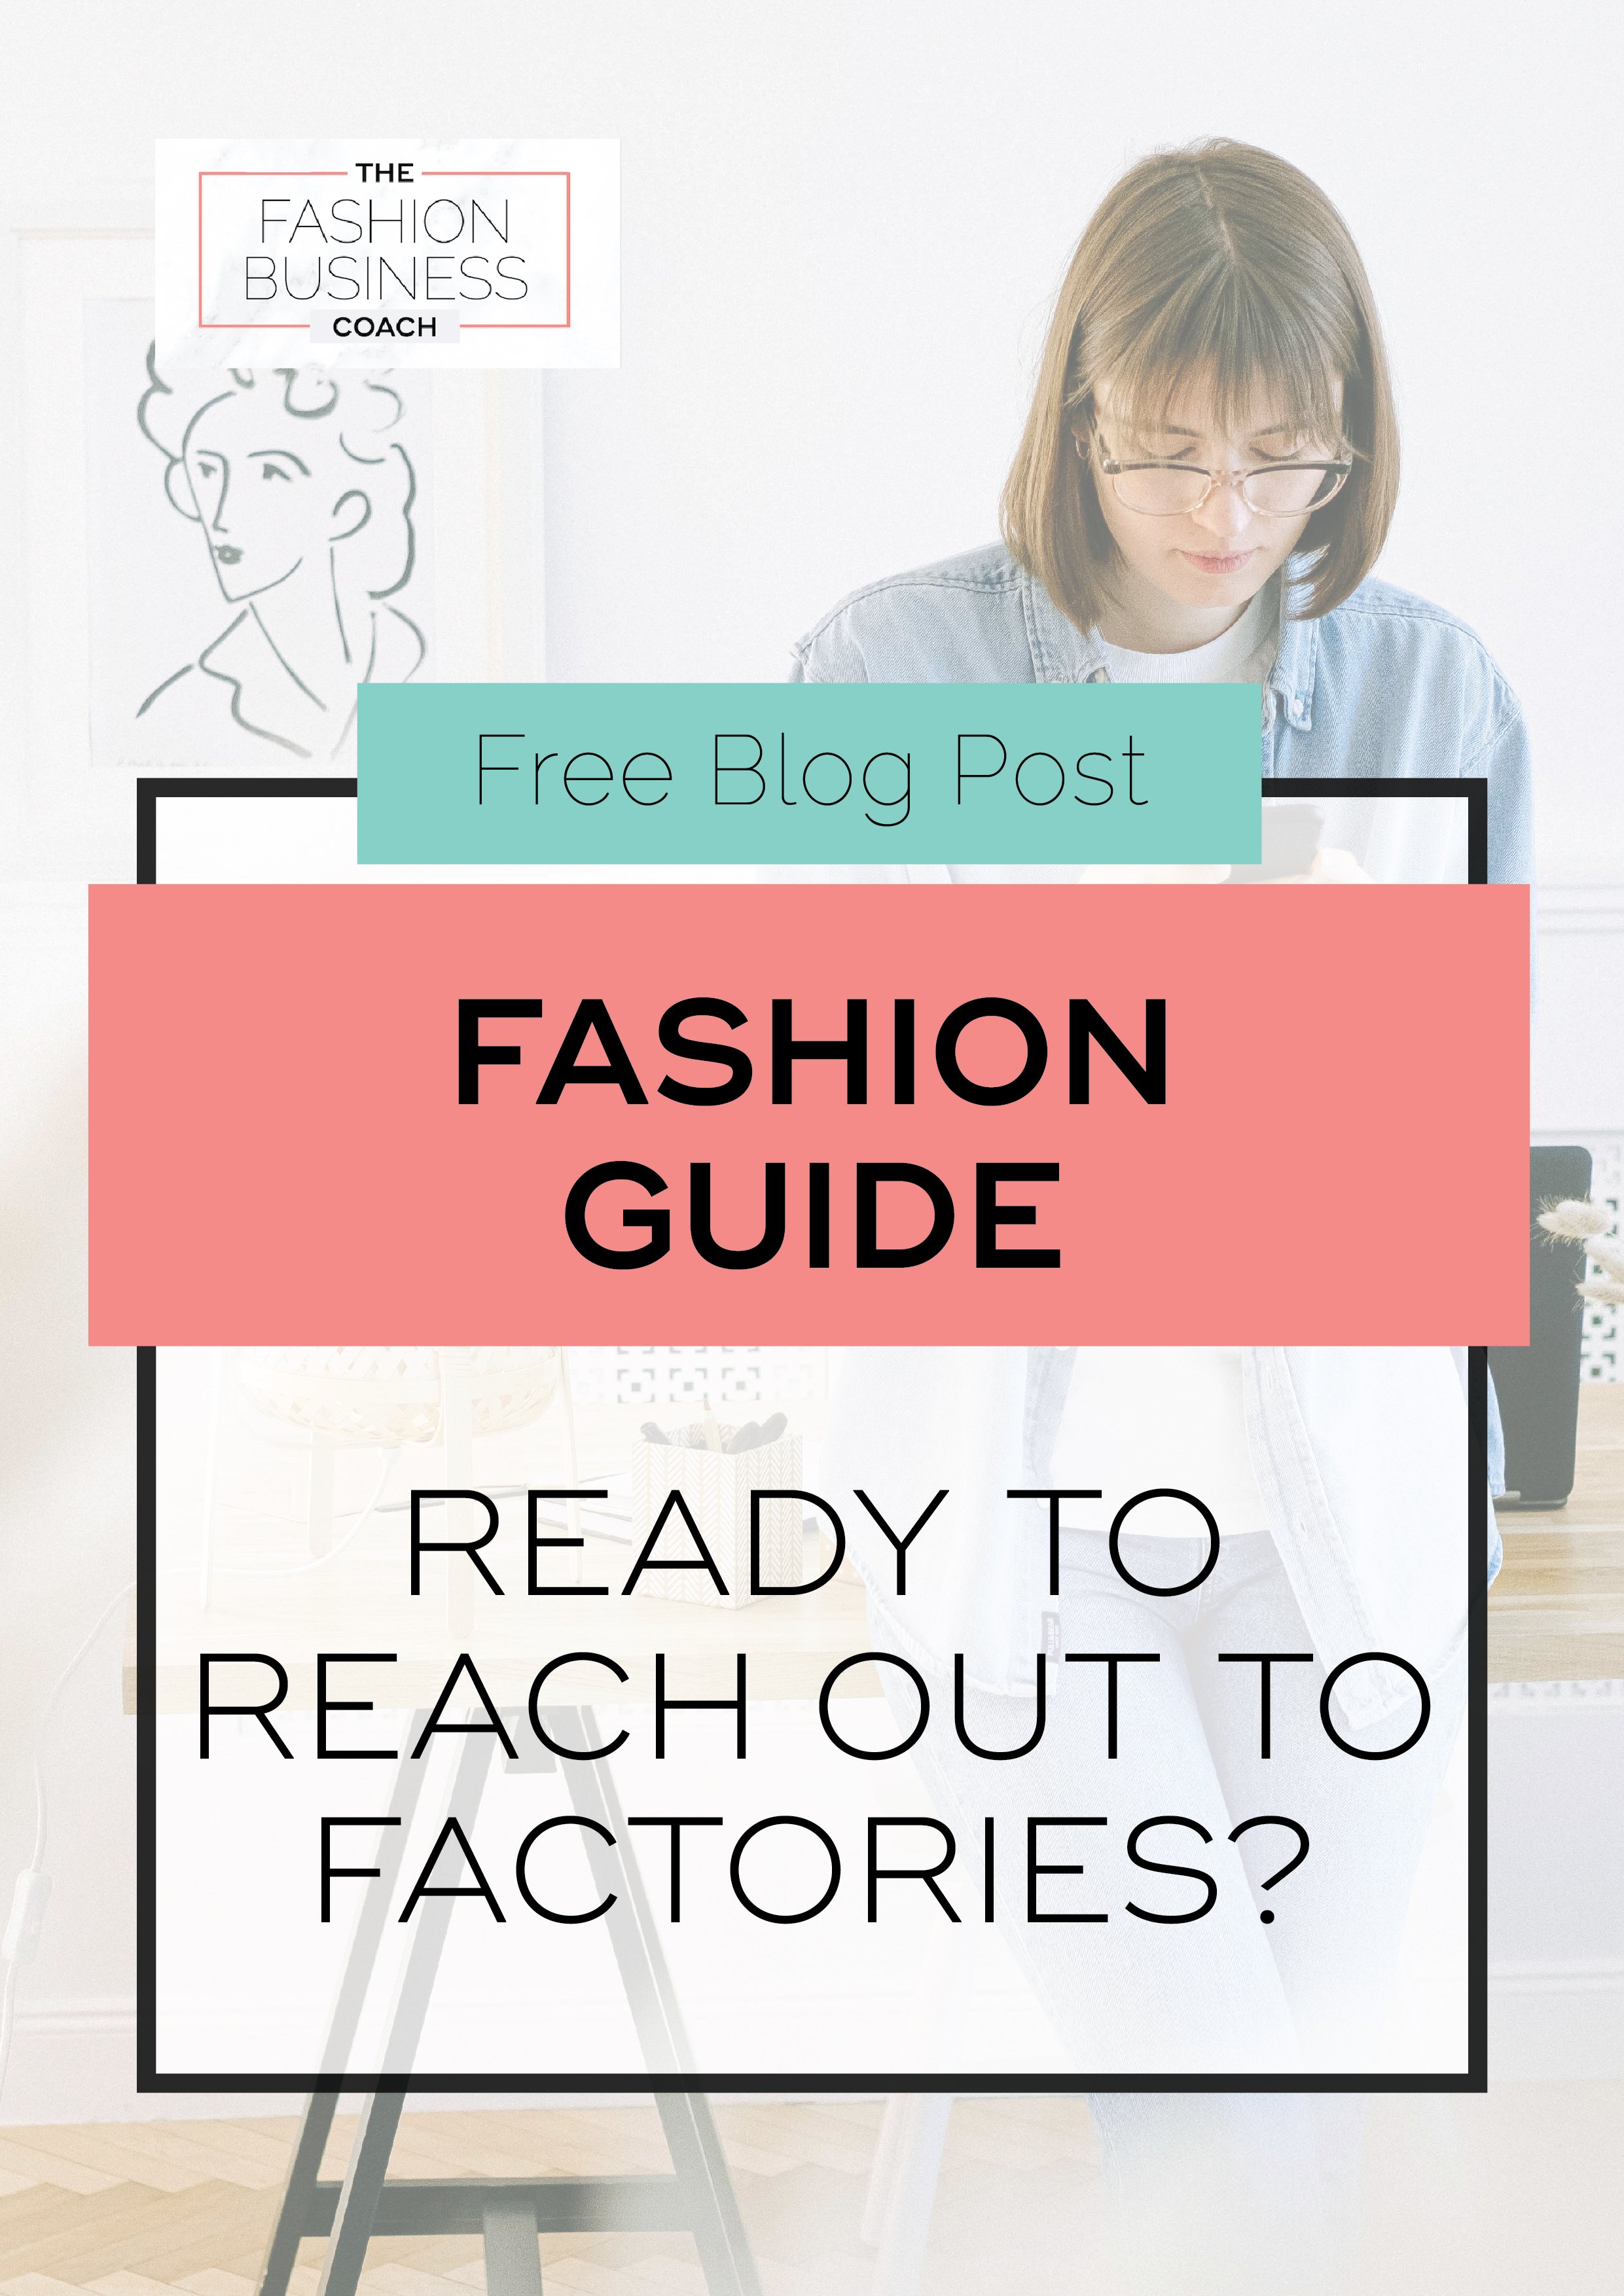 Fashion Guide Ready to Reach Out to Factories.jpg